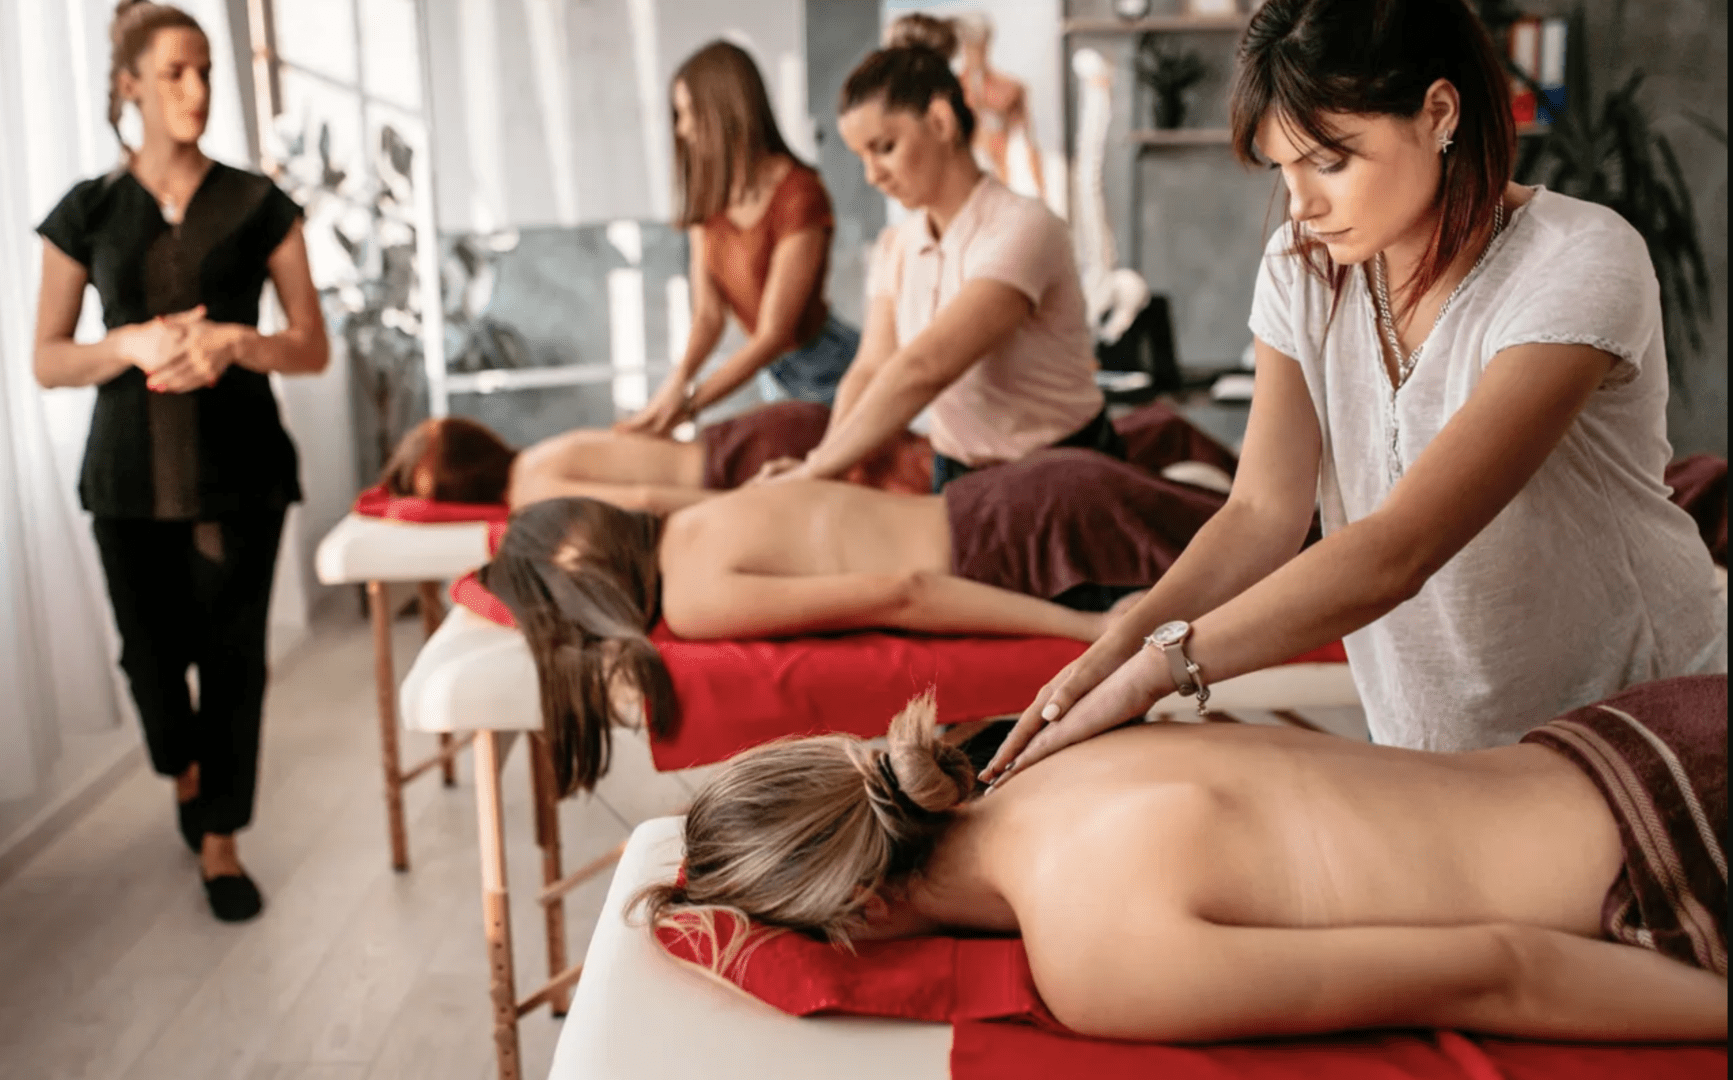 Hand, Arm, Leg and Feet Massage - Practitioner Accredited Diploma